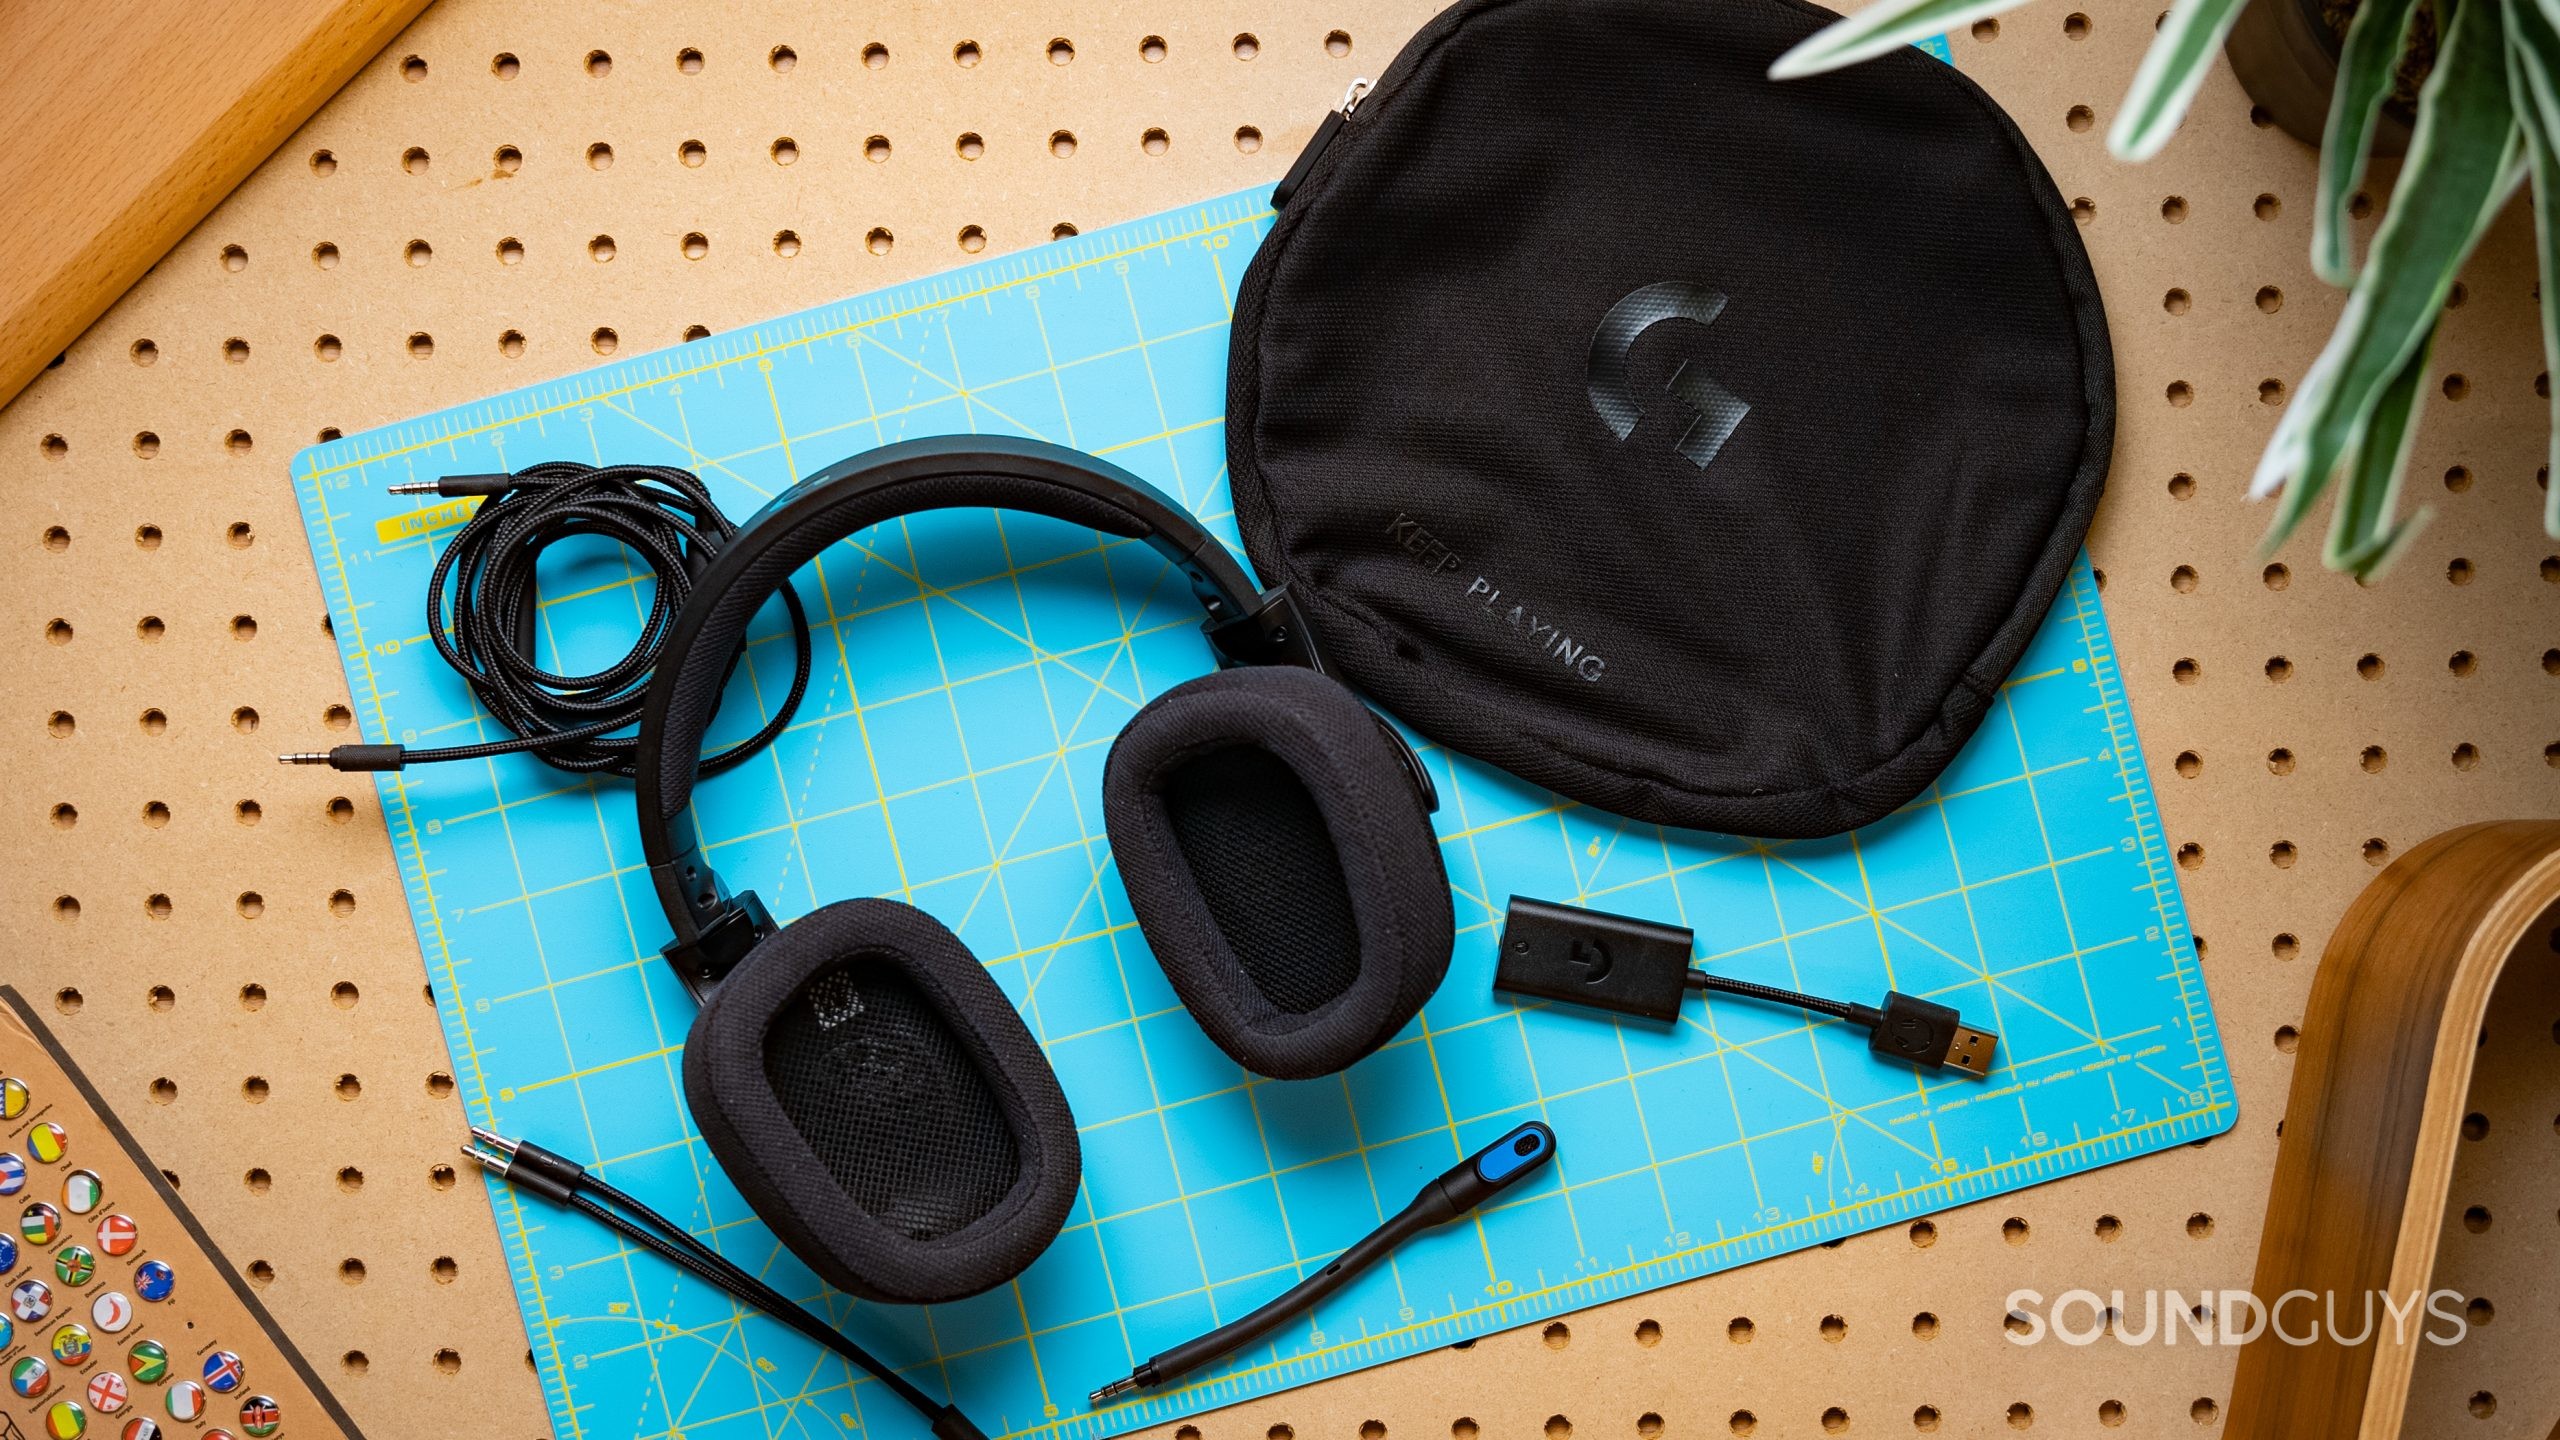 The Logitech G433 sitting on a wooden surface surrounded by all the accessories it comes with.